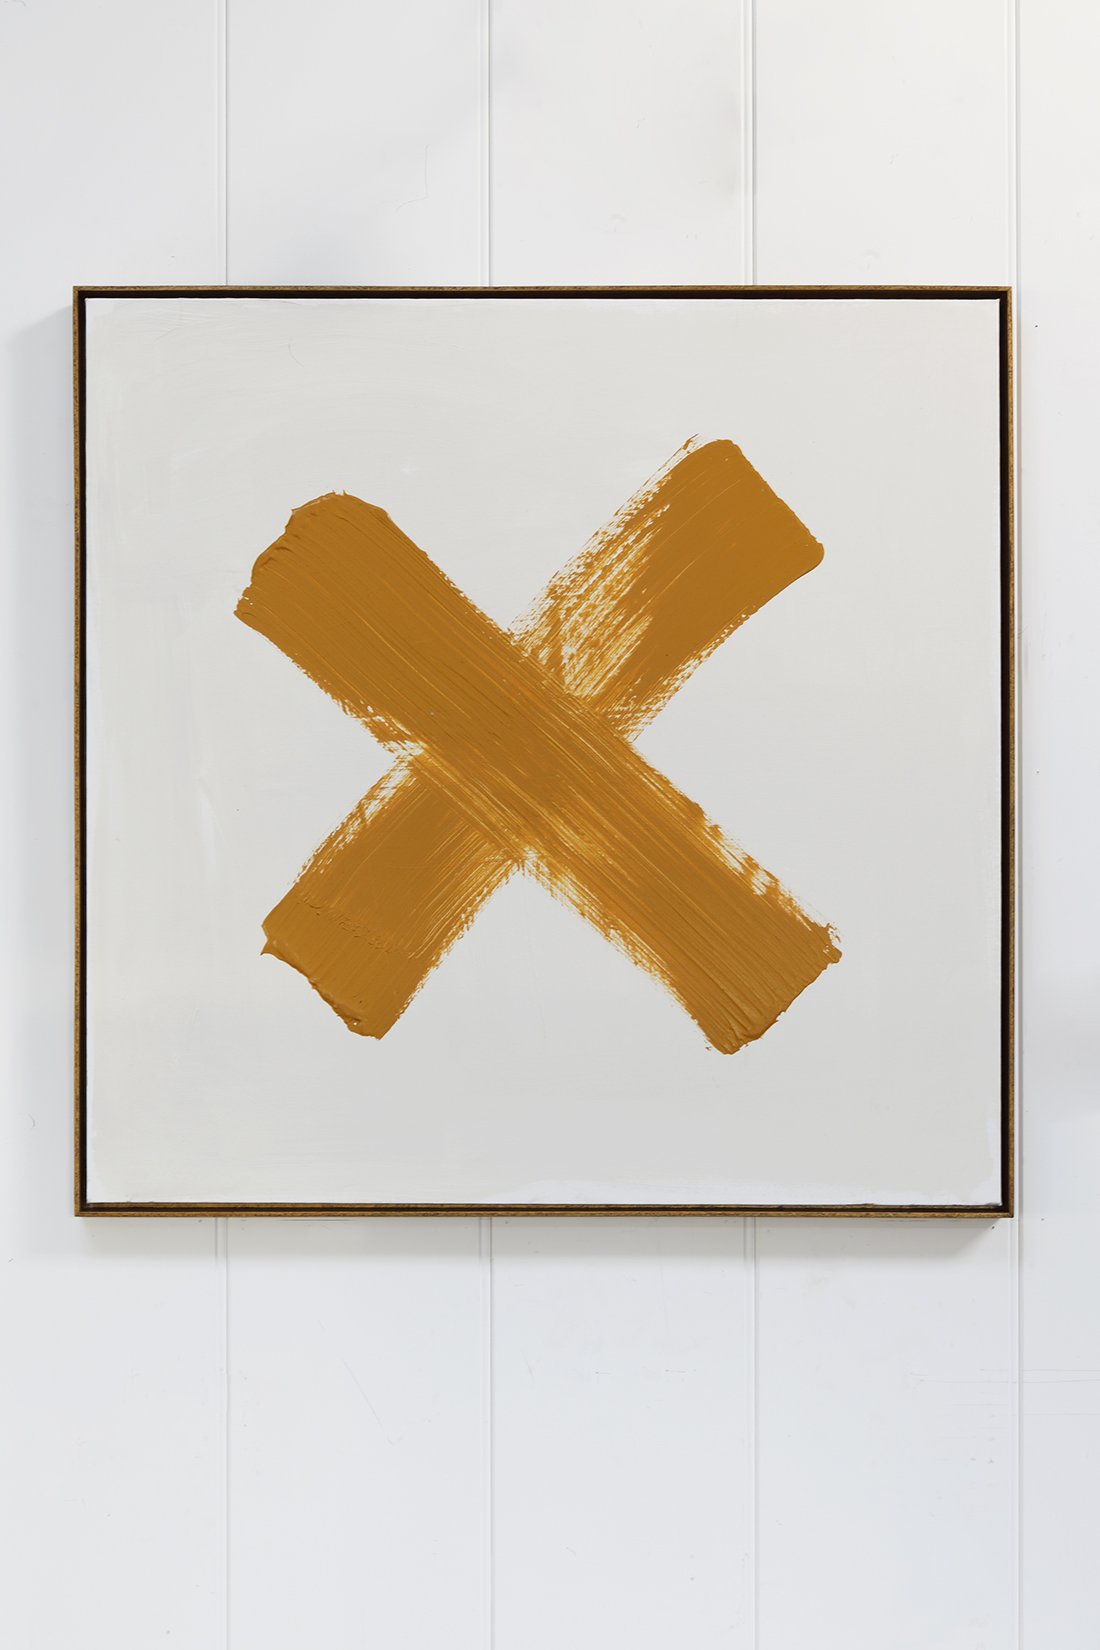 "X" Marks the spot - Yellow